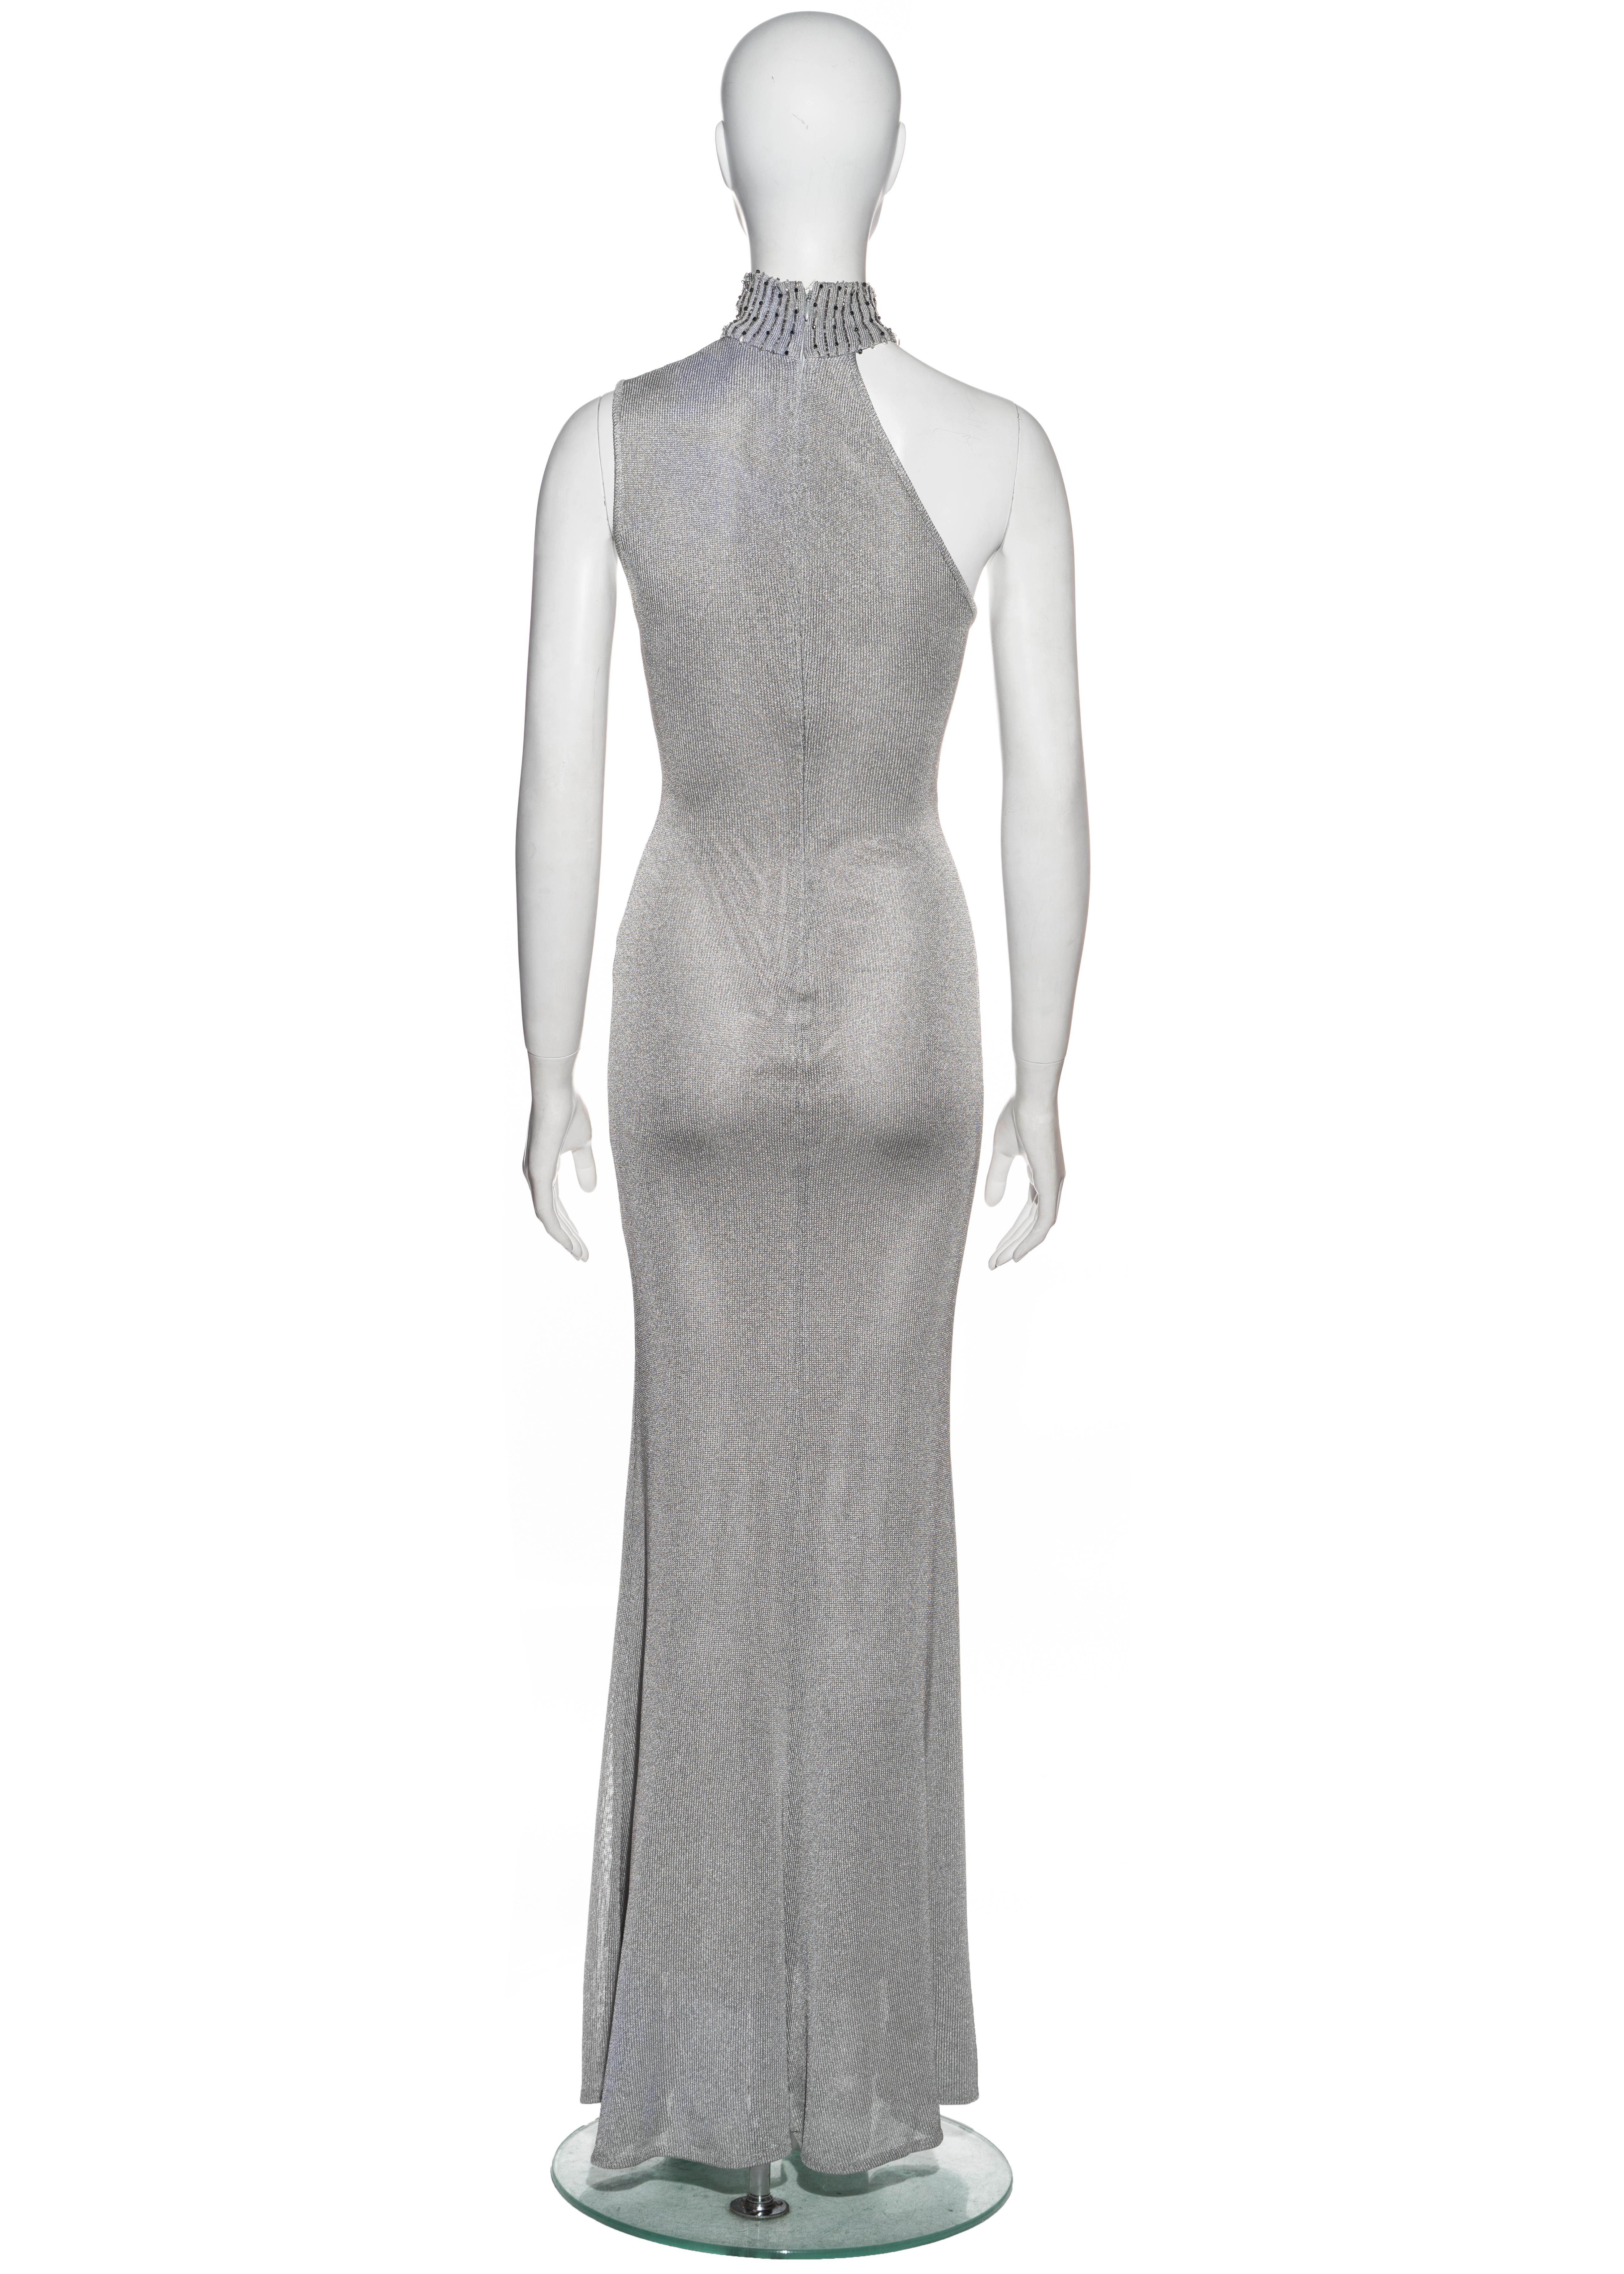 Silver Gianni Versace silver knitted rayon evening dress, fw 1996